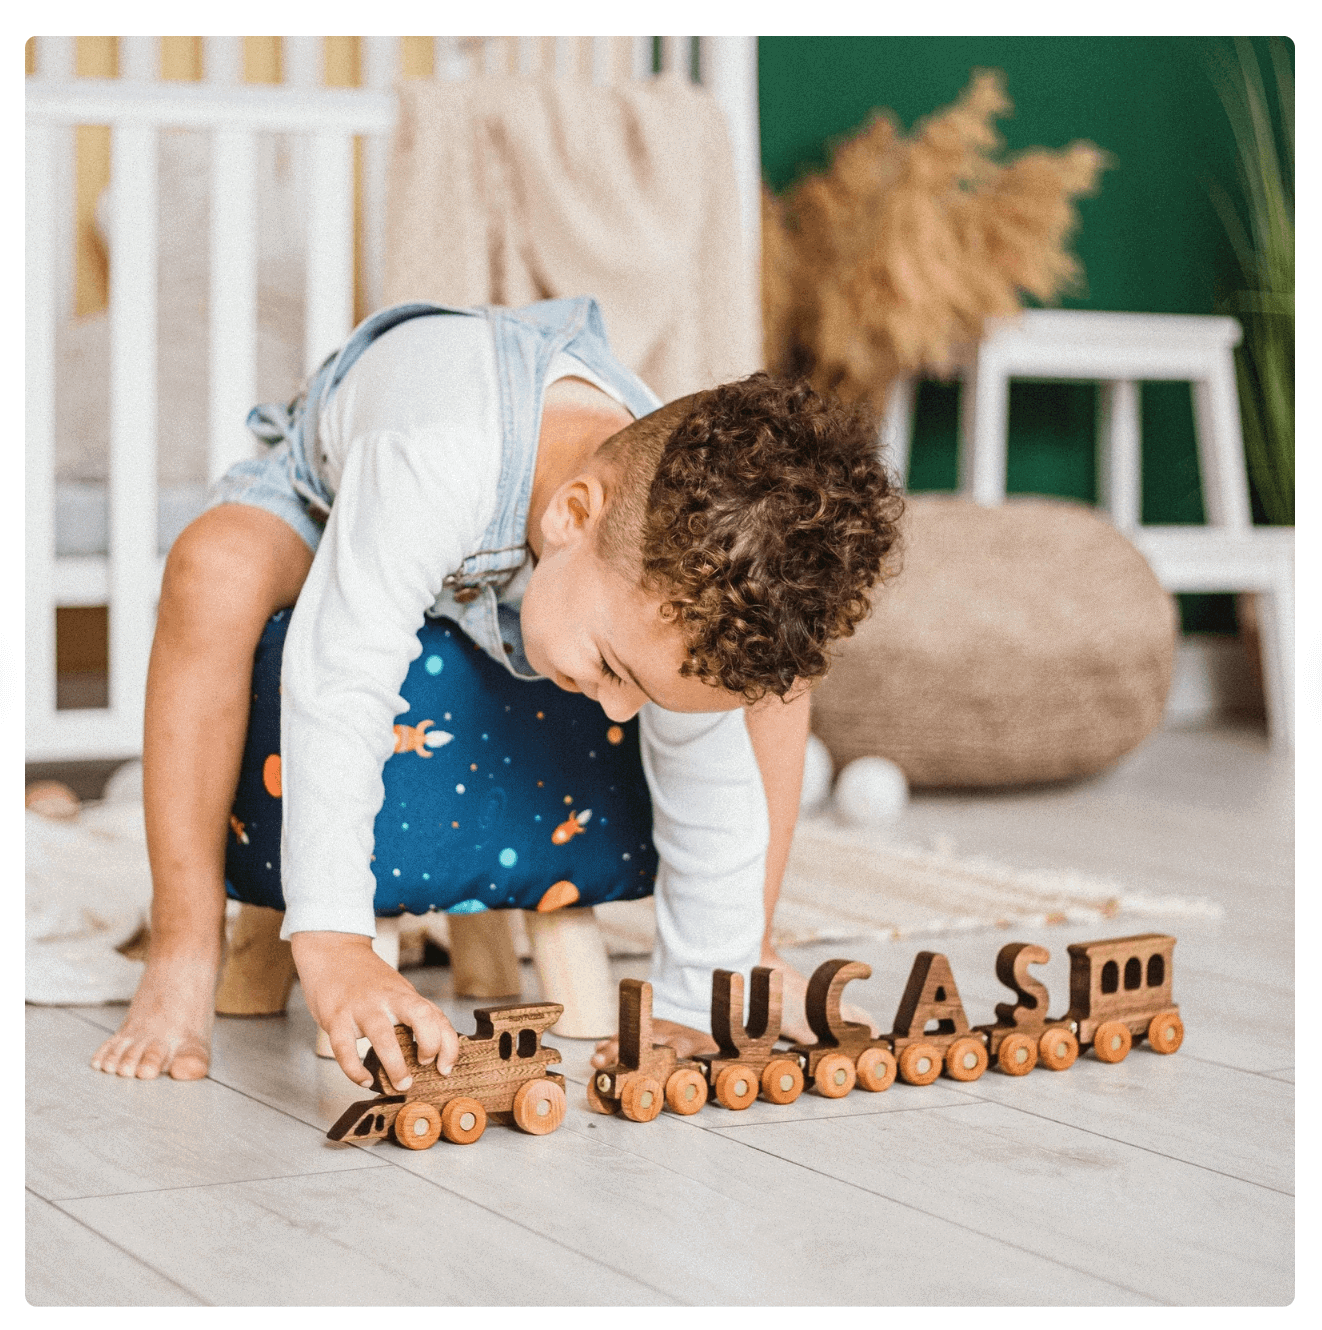 christmas gift ideas for the kid who has everything wooden train personalized